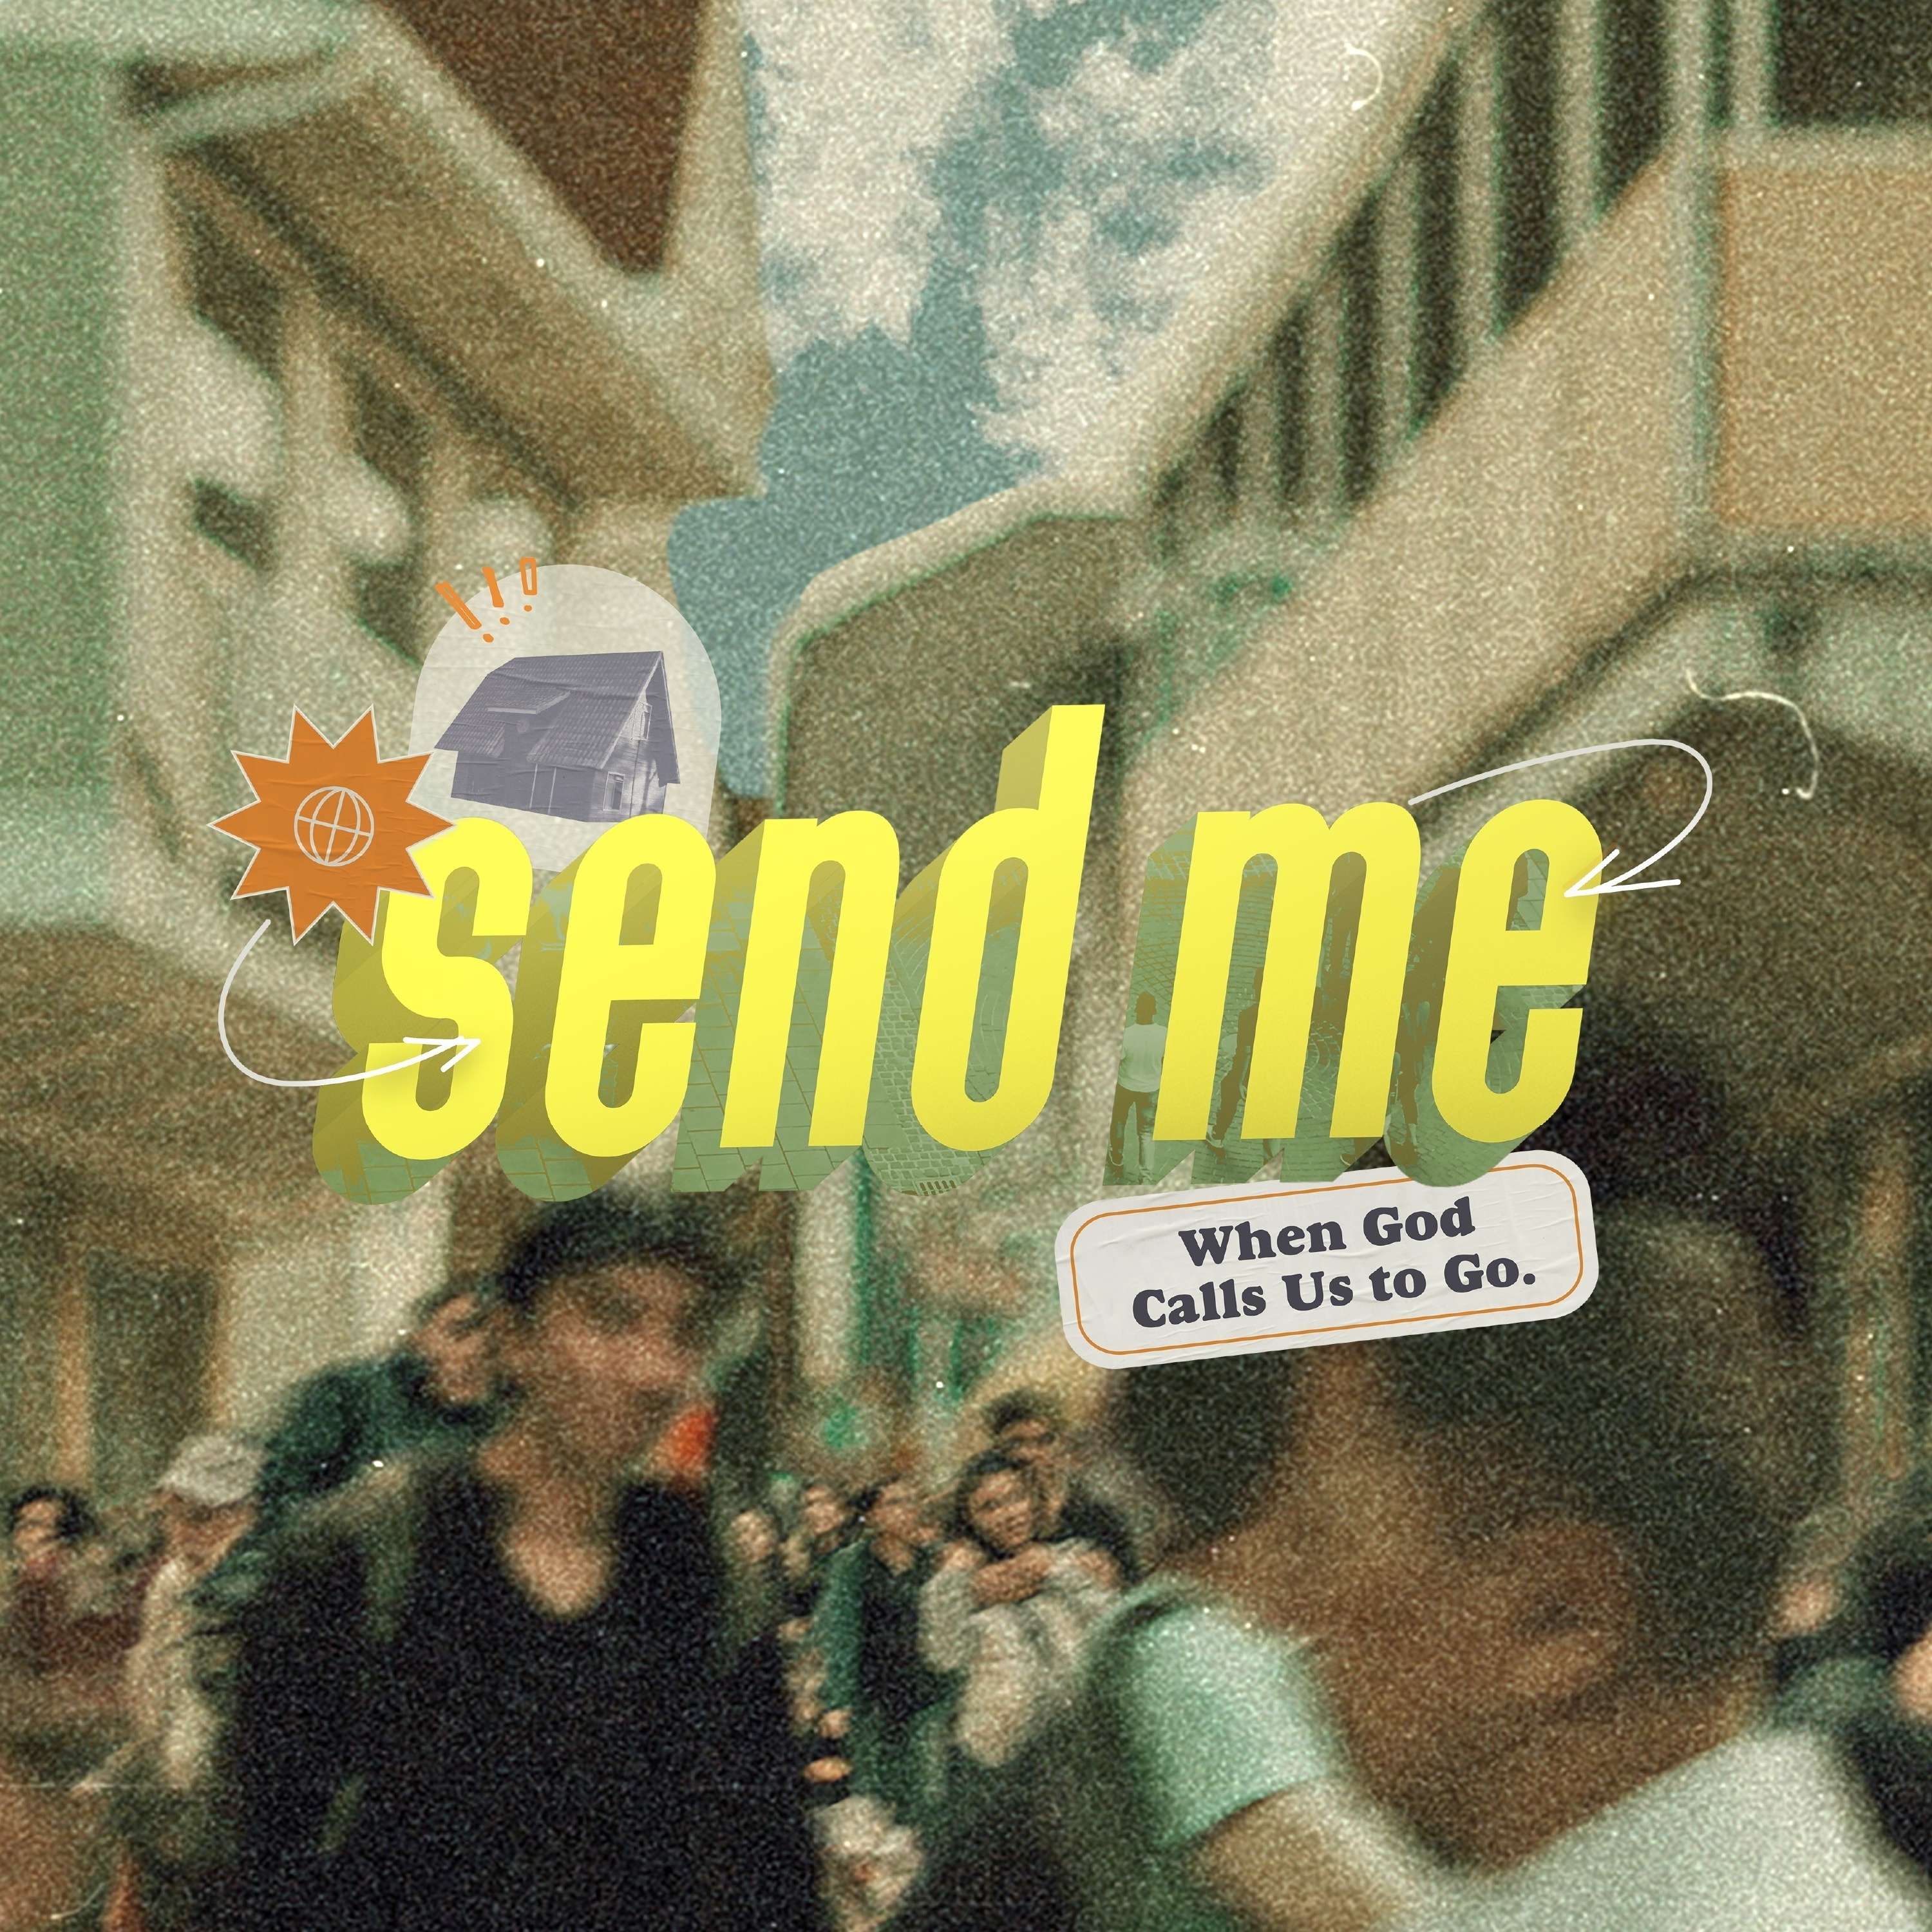 Send Me: The Glory of God - Part 1